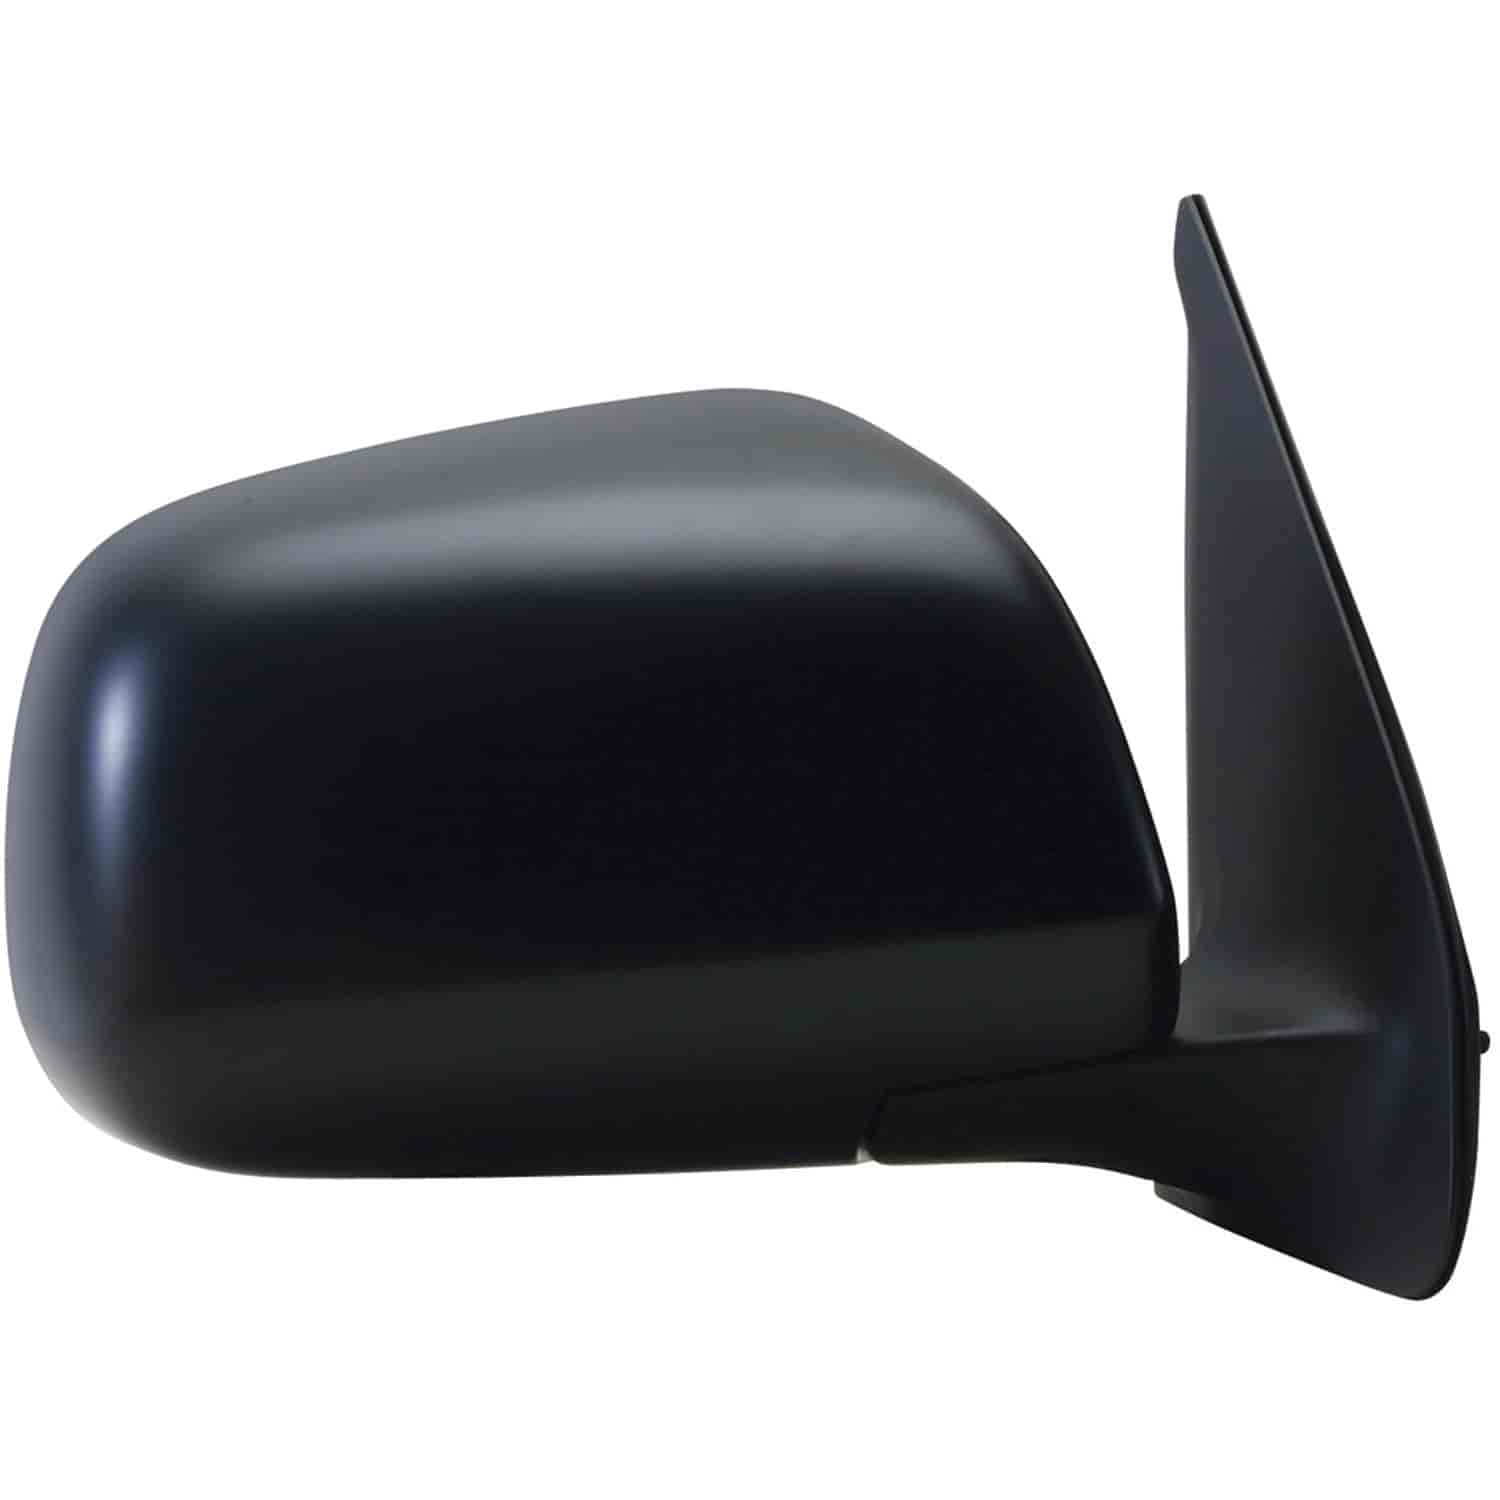 OEM Style Replacement mirror for 05-14 Toyota Tacoma Regular/ Access Cab passenger side mirror teste